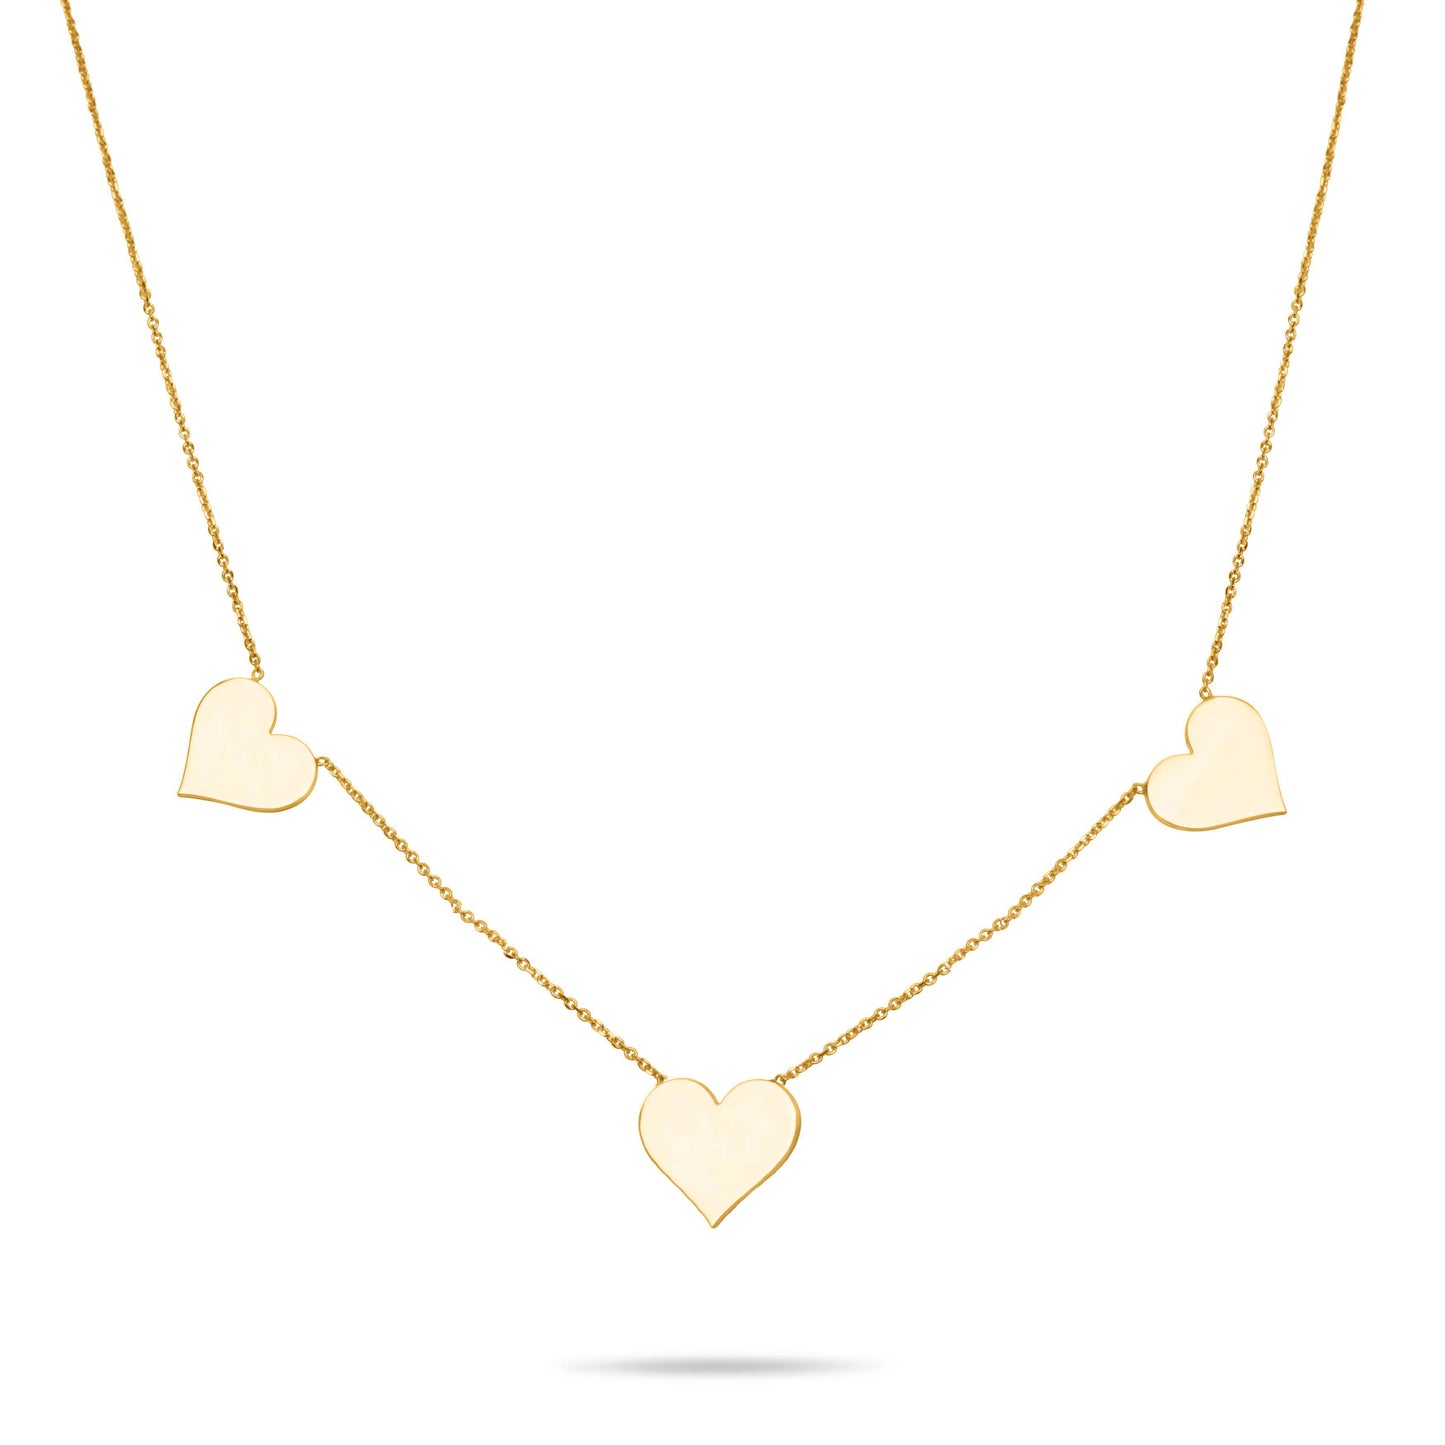 Three Hearts necklace With Messages  - Gold Plated